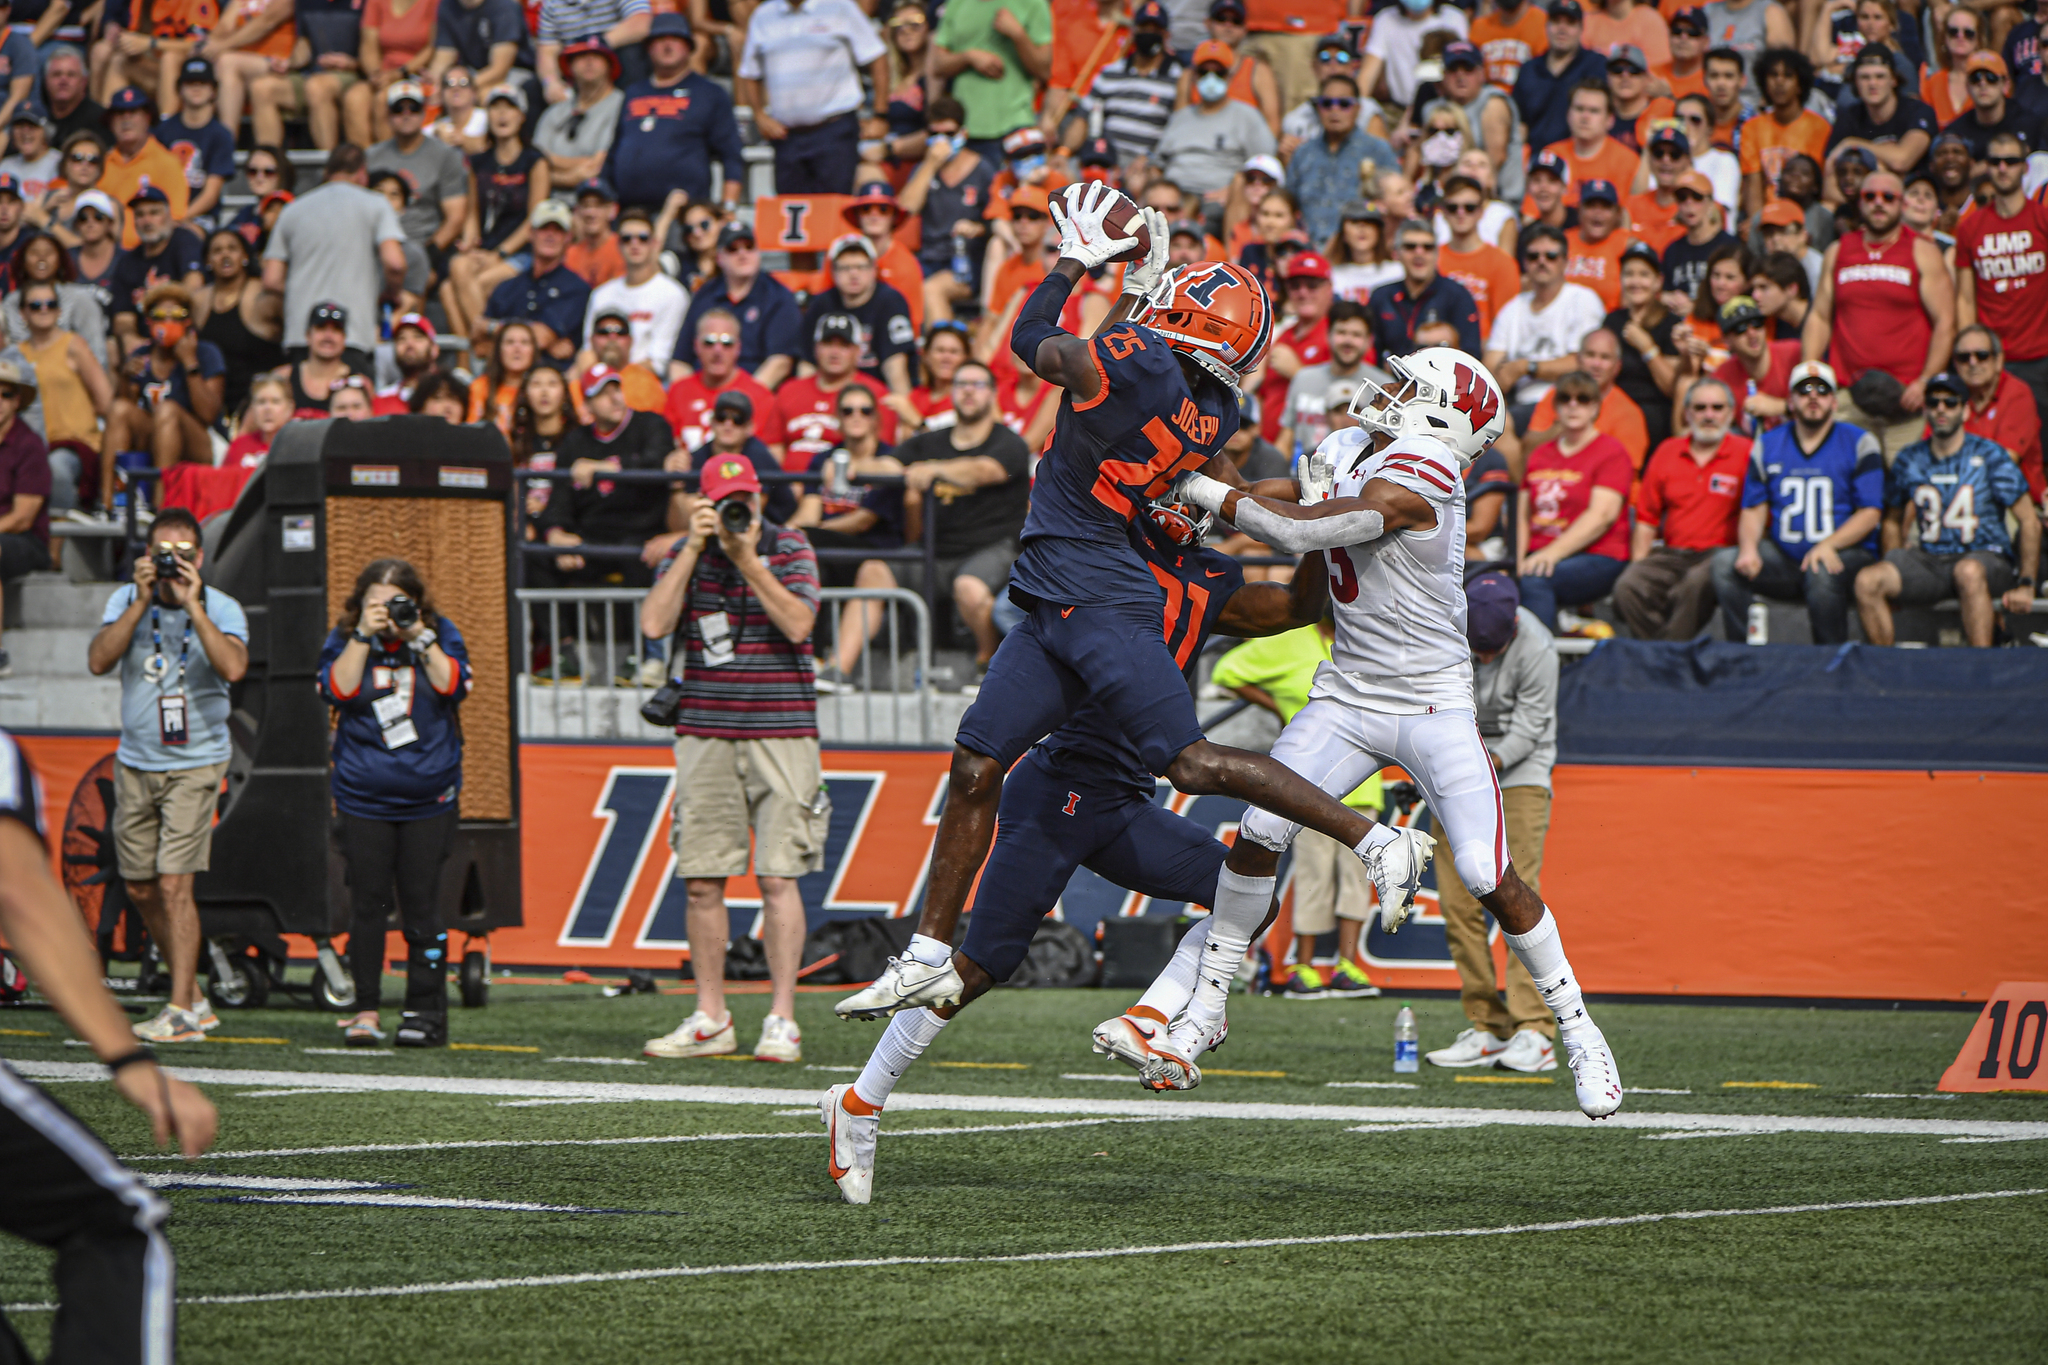 Mike Cagley's Heat Checks and Hail Marys - Finding Out Where the Illinois Football Program Is